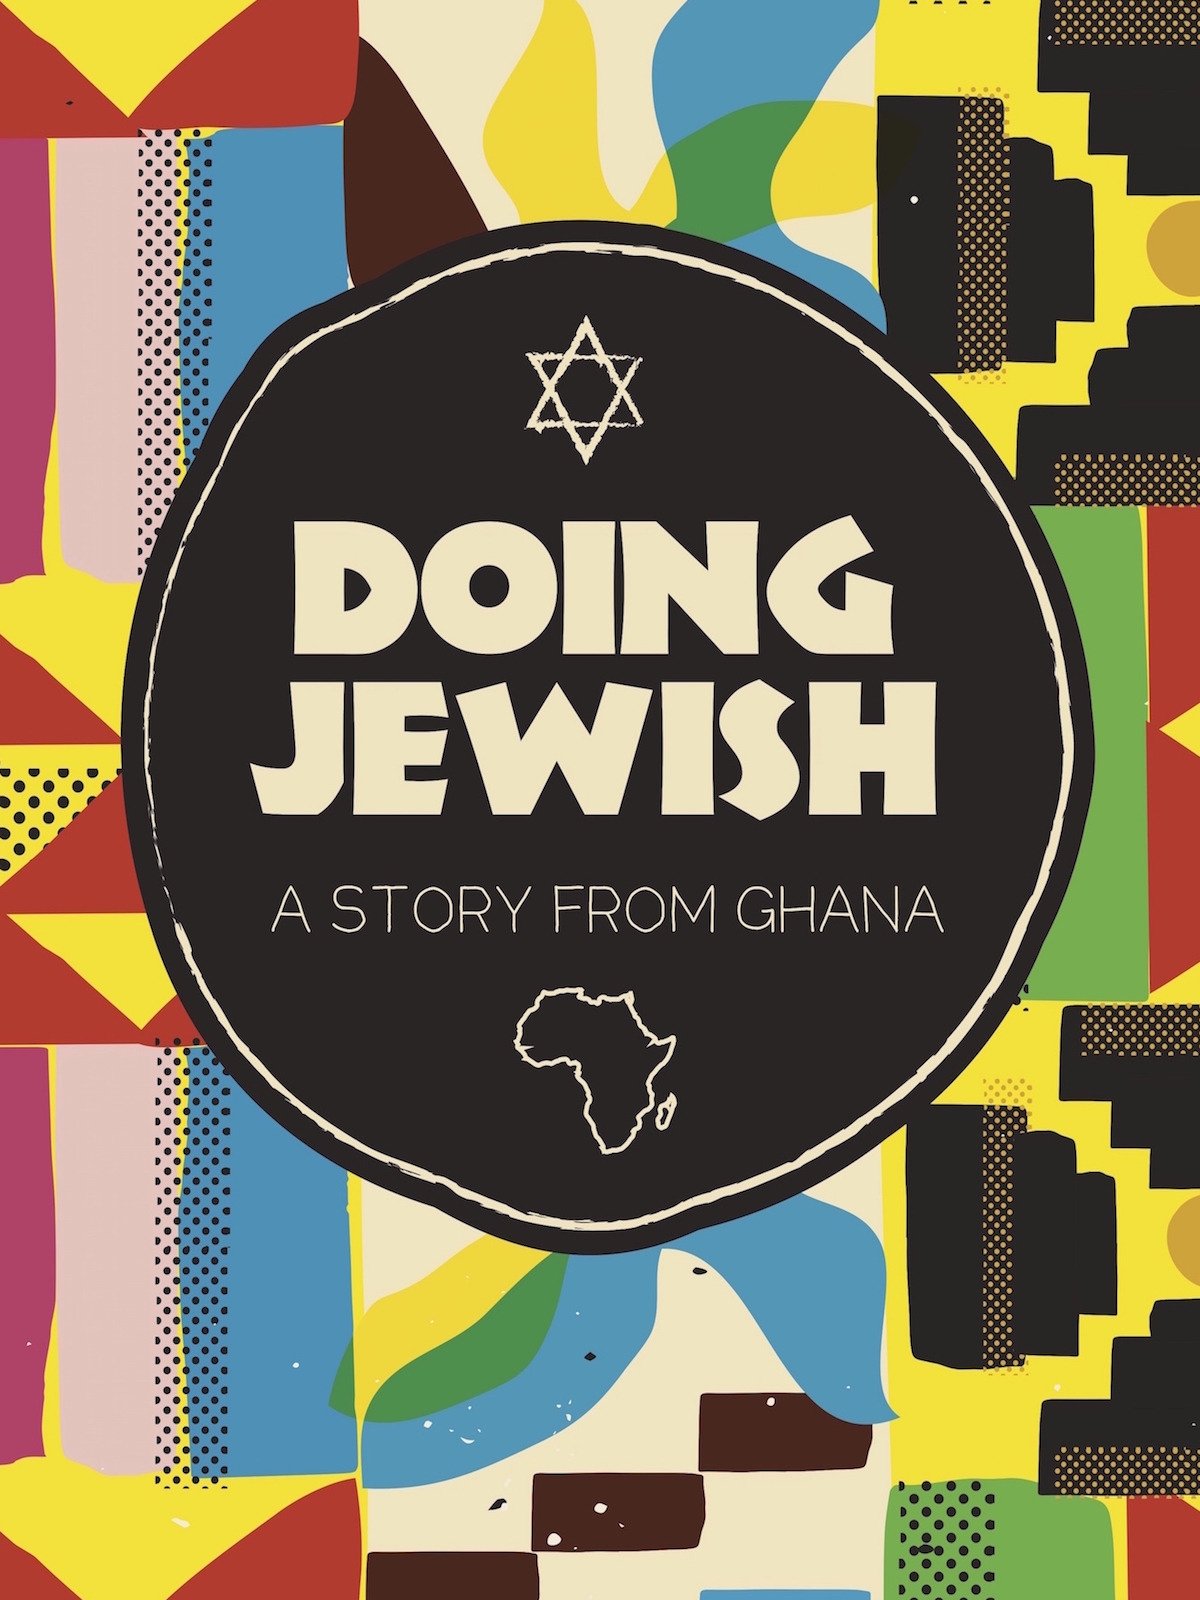 "Doing Jewish - in Ghana" facilitated by Howard Schickler